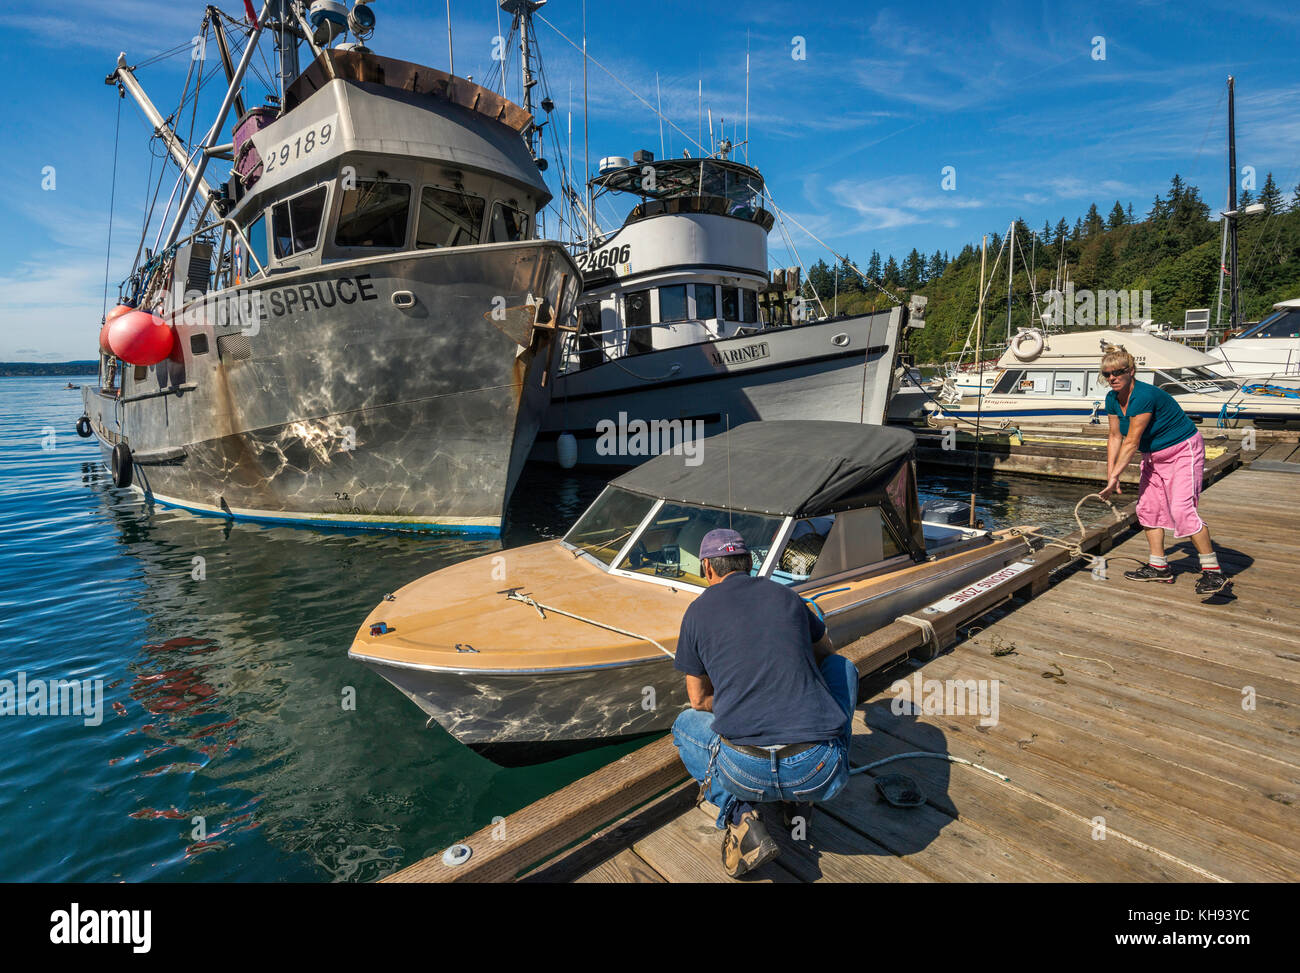 Man and woman tying up boat on jetty, fishing boats moored at marina in Quathiaski Cove on Quadra Island, Vancouver Island area, British Columbia, Can Stock Photo